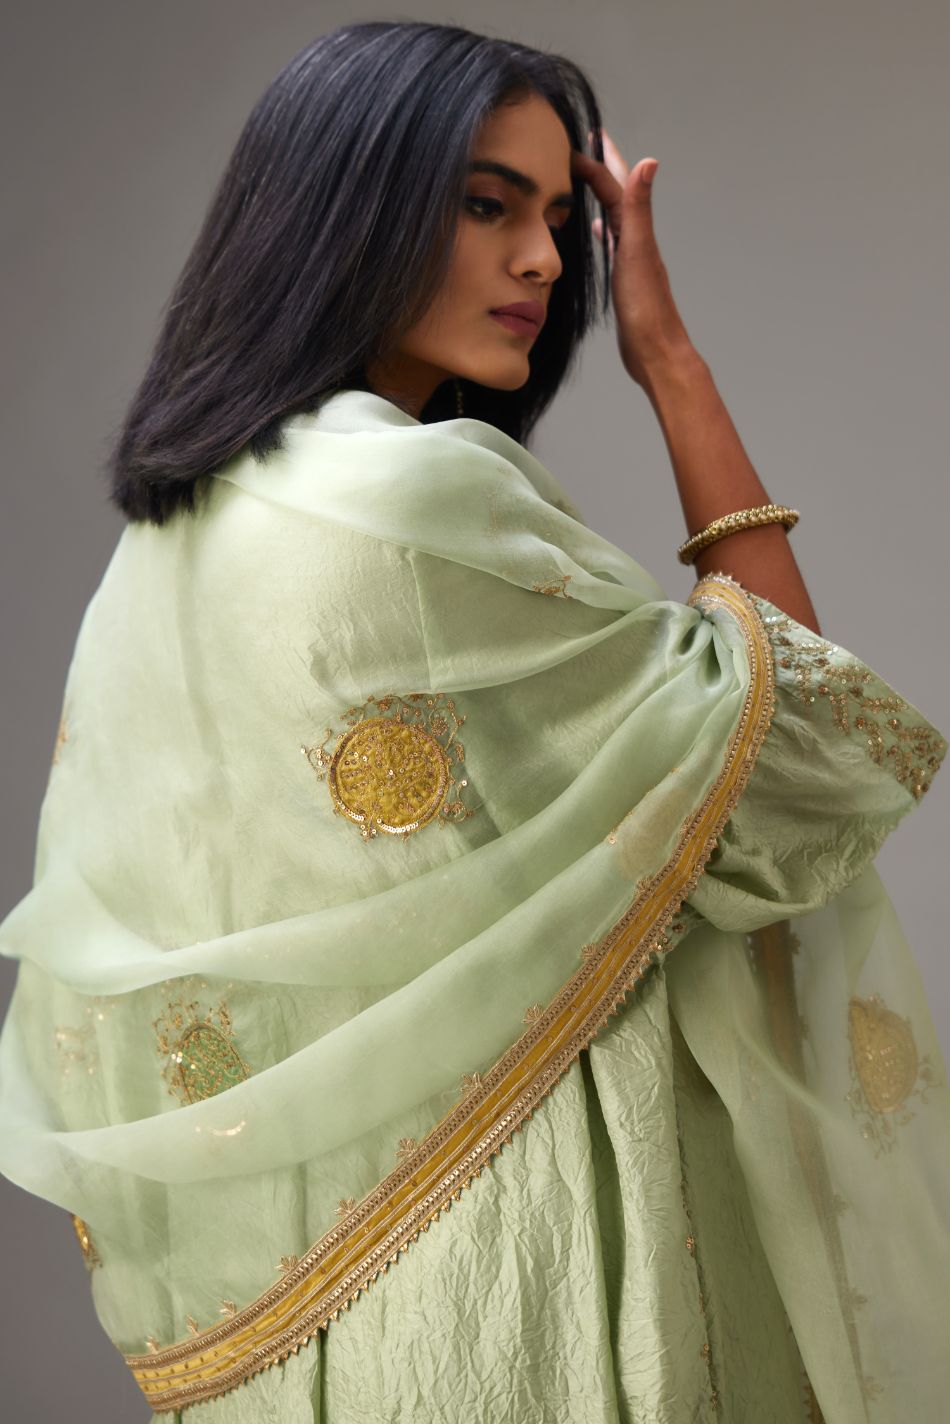 Green silk organza dupatta highlighted with all-over embroidered boota and contrast colored border running along all edges.